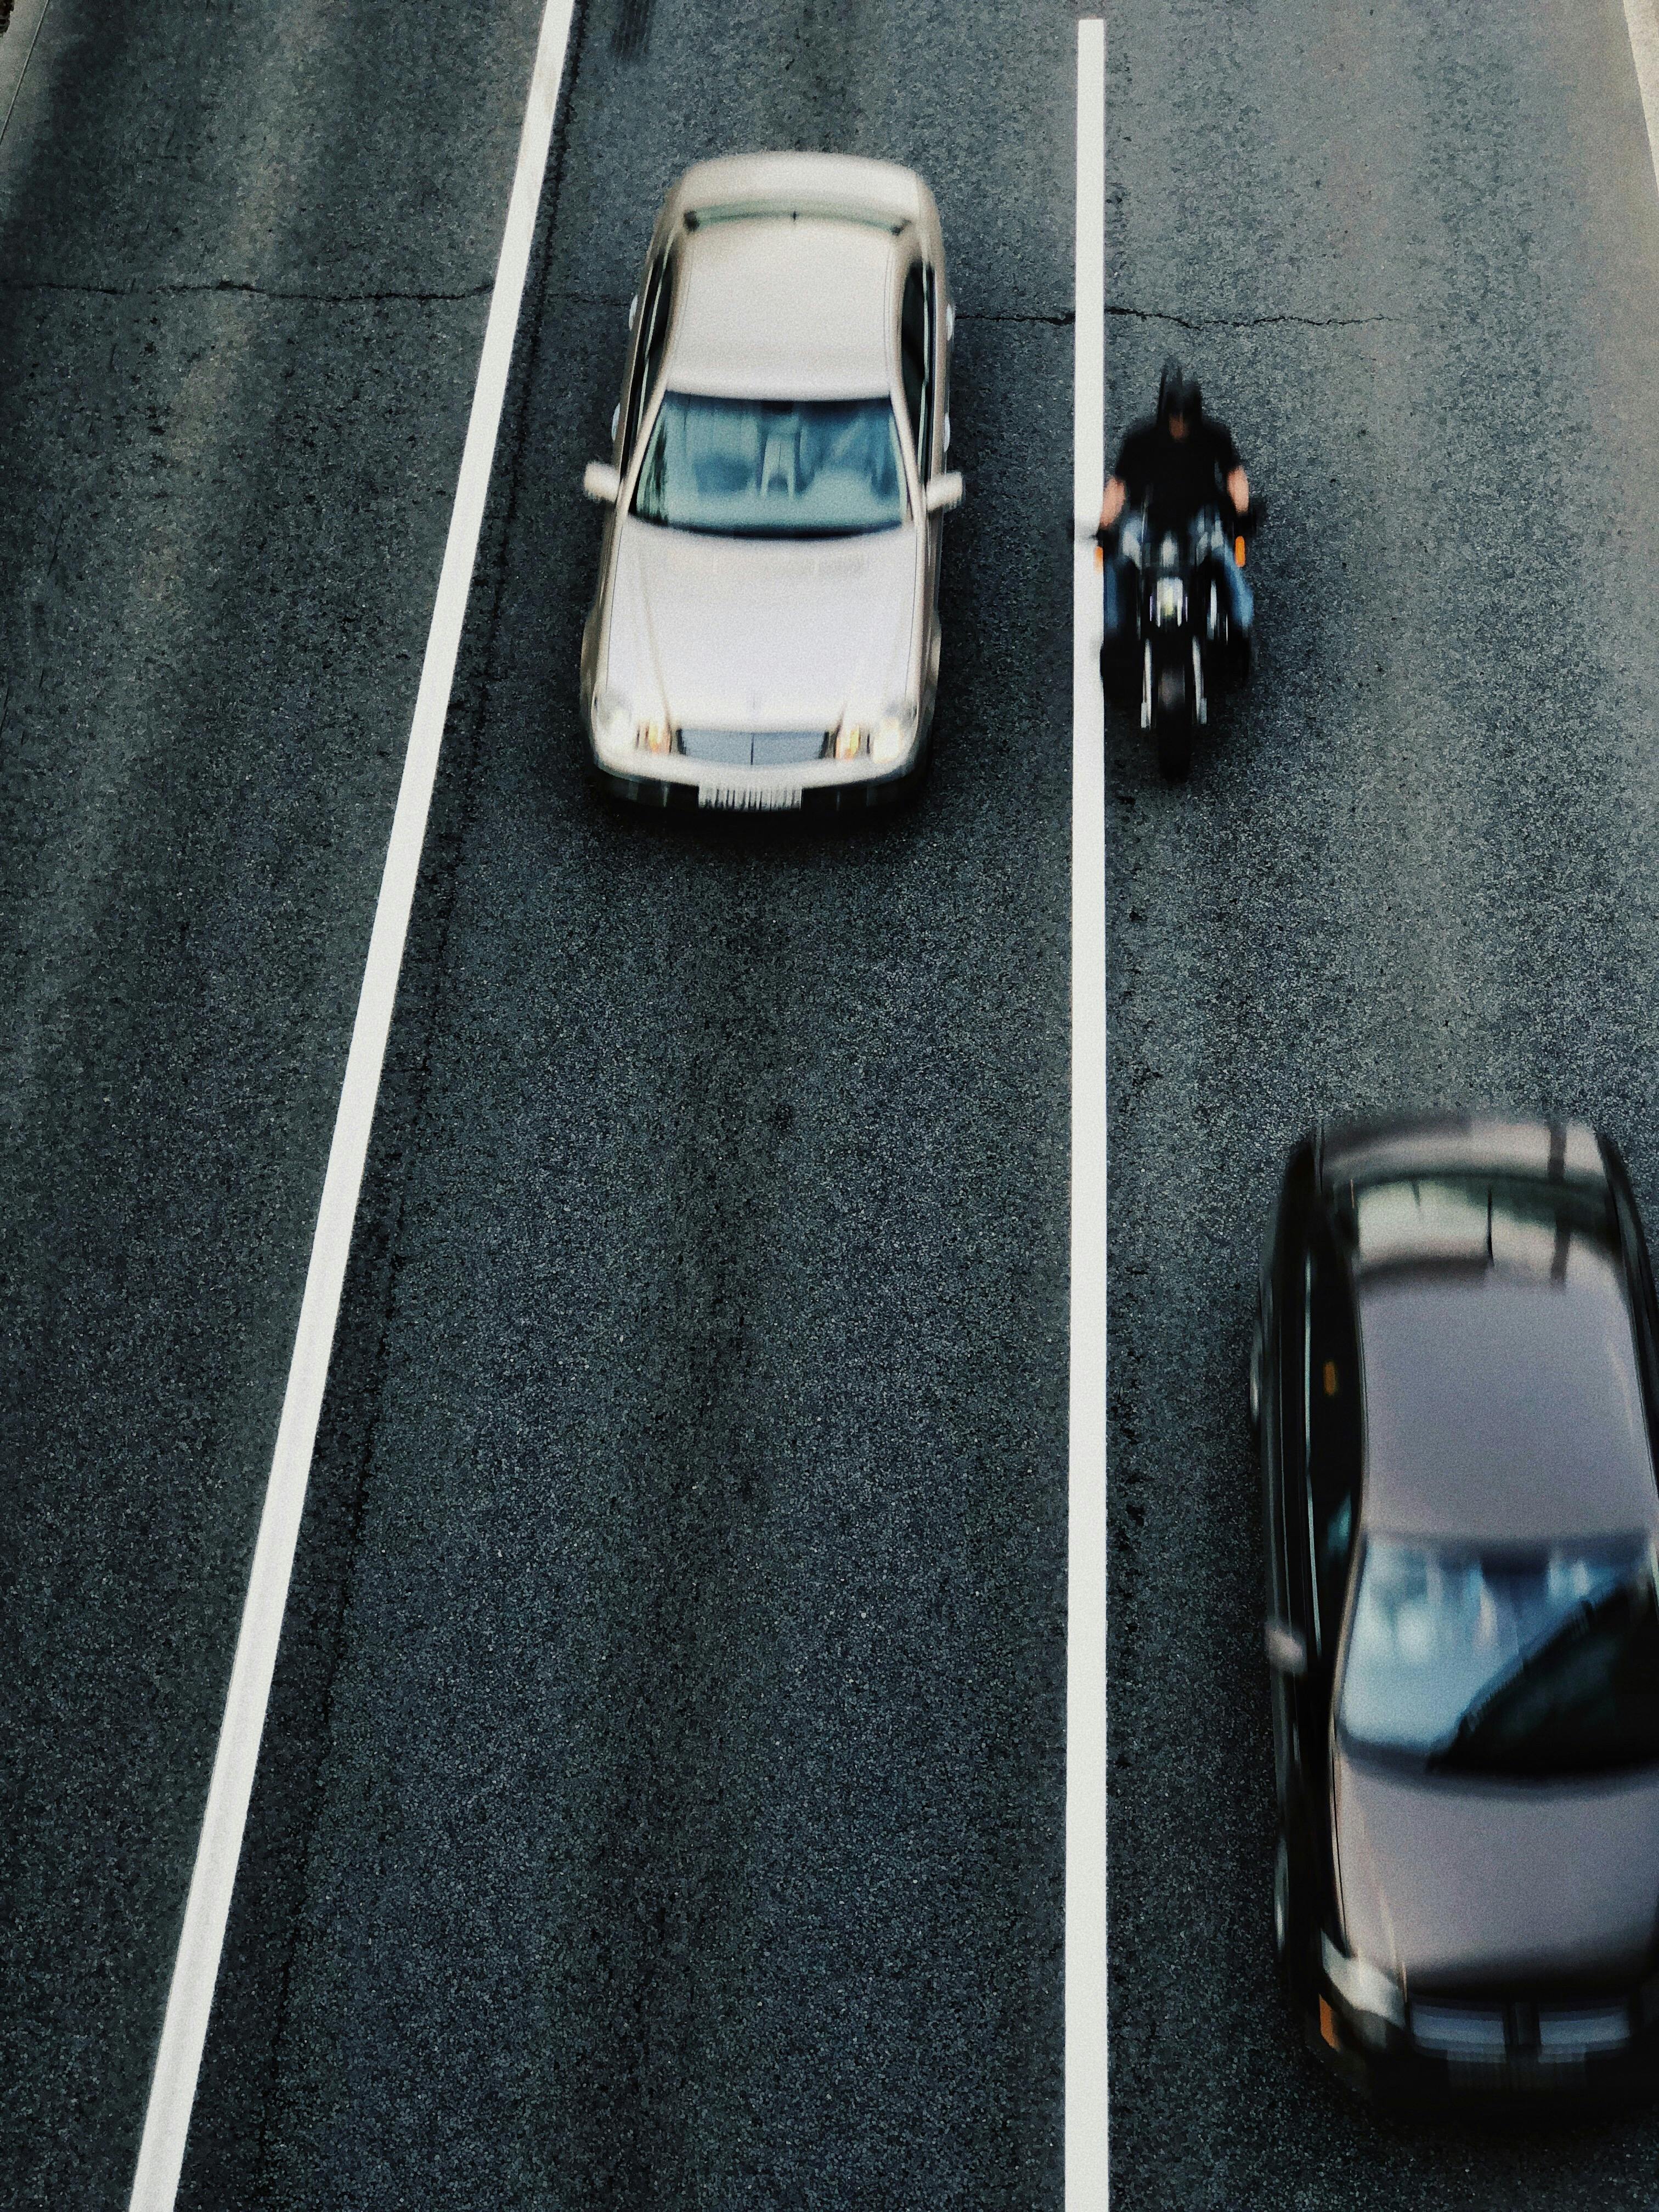 panning photo of cars and motorcycle